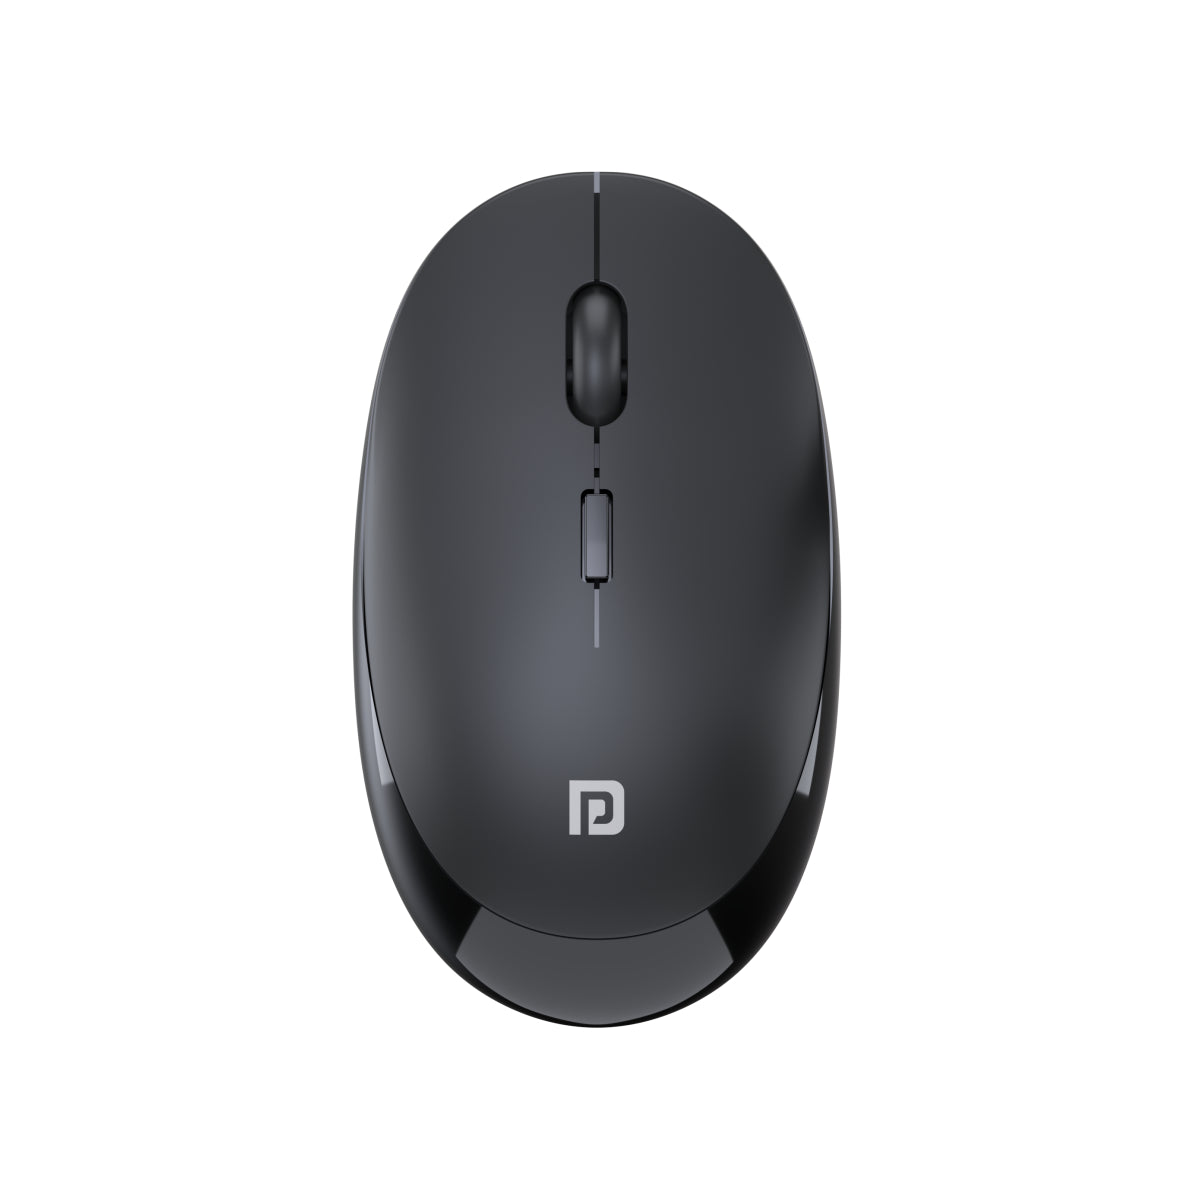 PORTRONICS-Toad 22 Wireless Optical Mouse